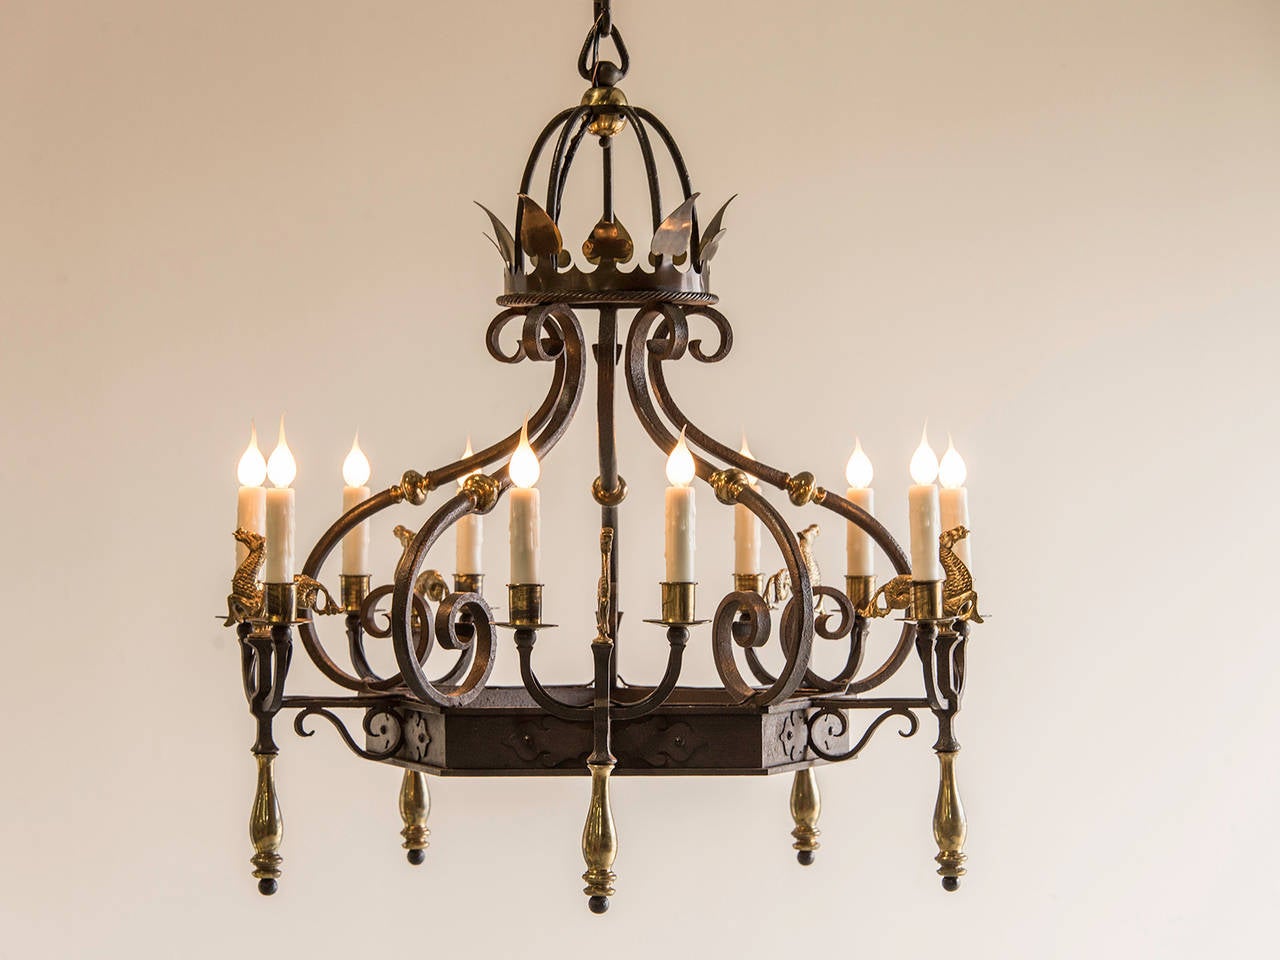 Régence Style Iron and Brass Ten Light Chandelier, France c.1920. The geometric balance and symmetry combined with the fanciful equestrian motifs in this chandelier as well as the strong visual contrast between the dark iron and polished brass make